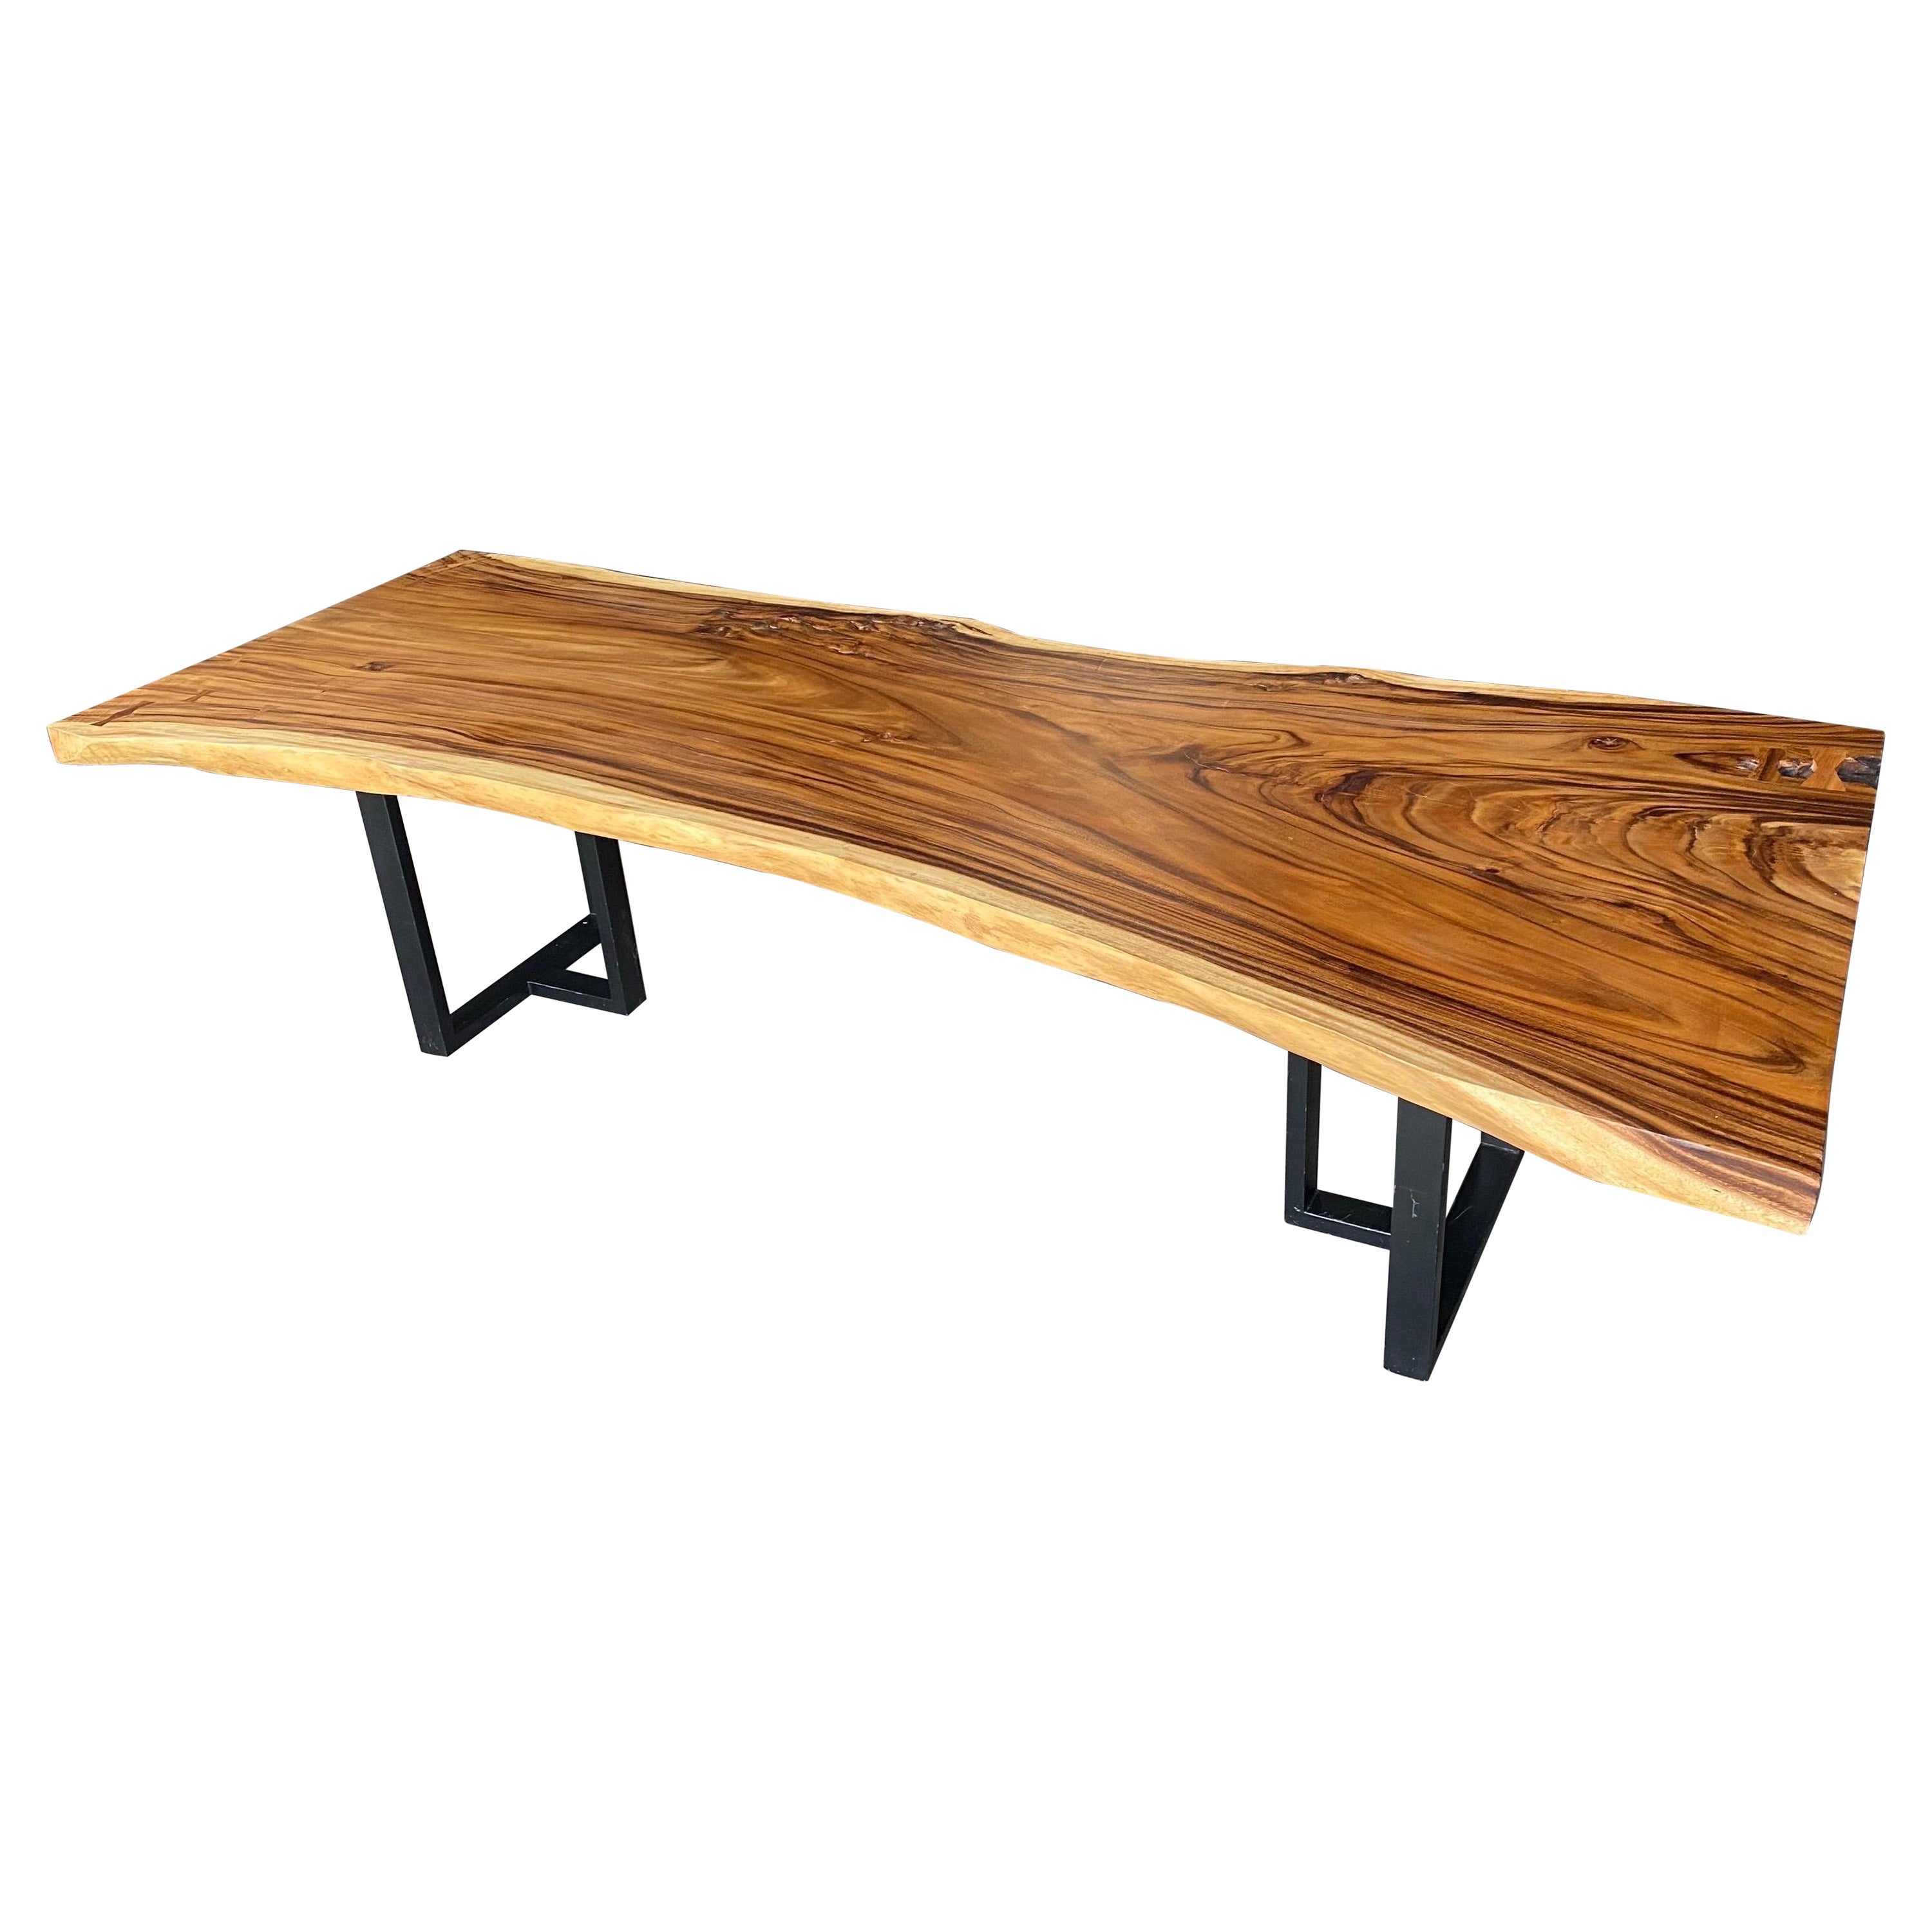 Live Edge Walnut Table or Desk For Sale